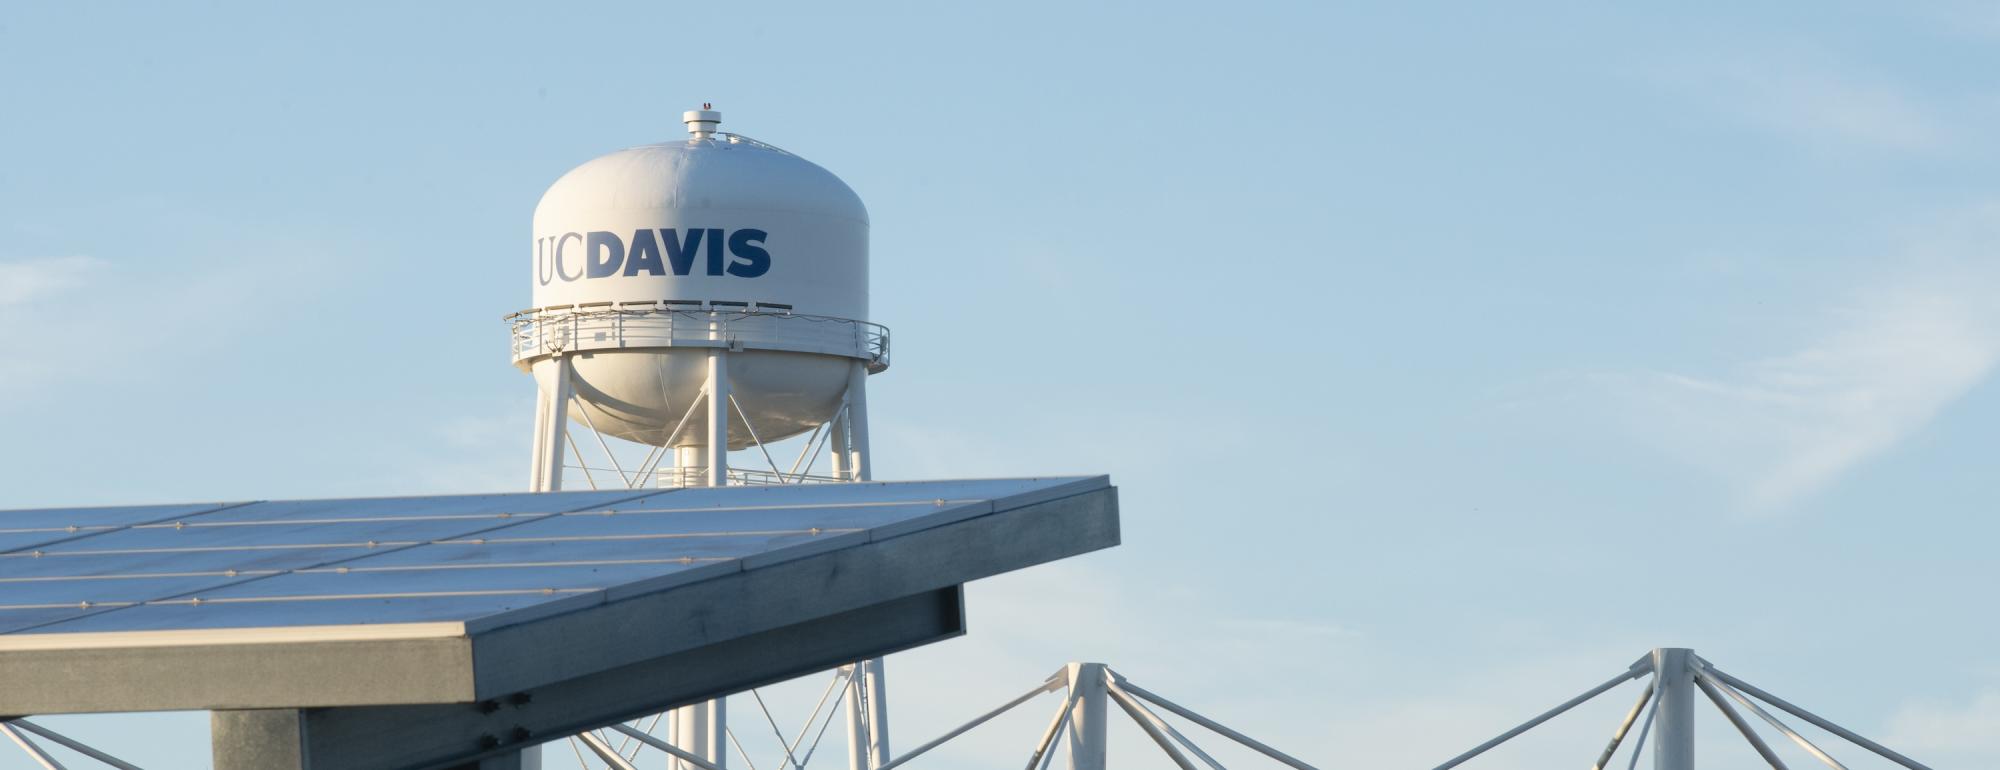 UC Davis water tower and solar panel array